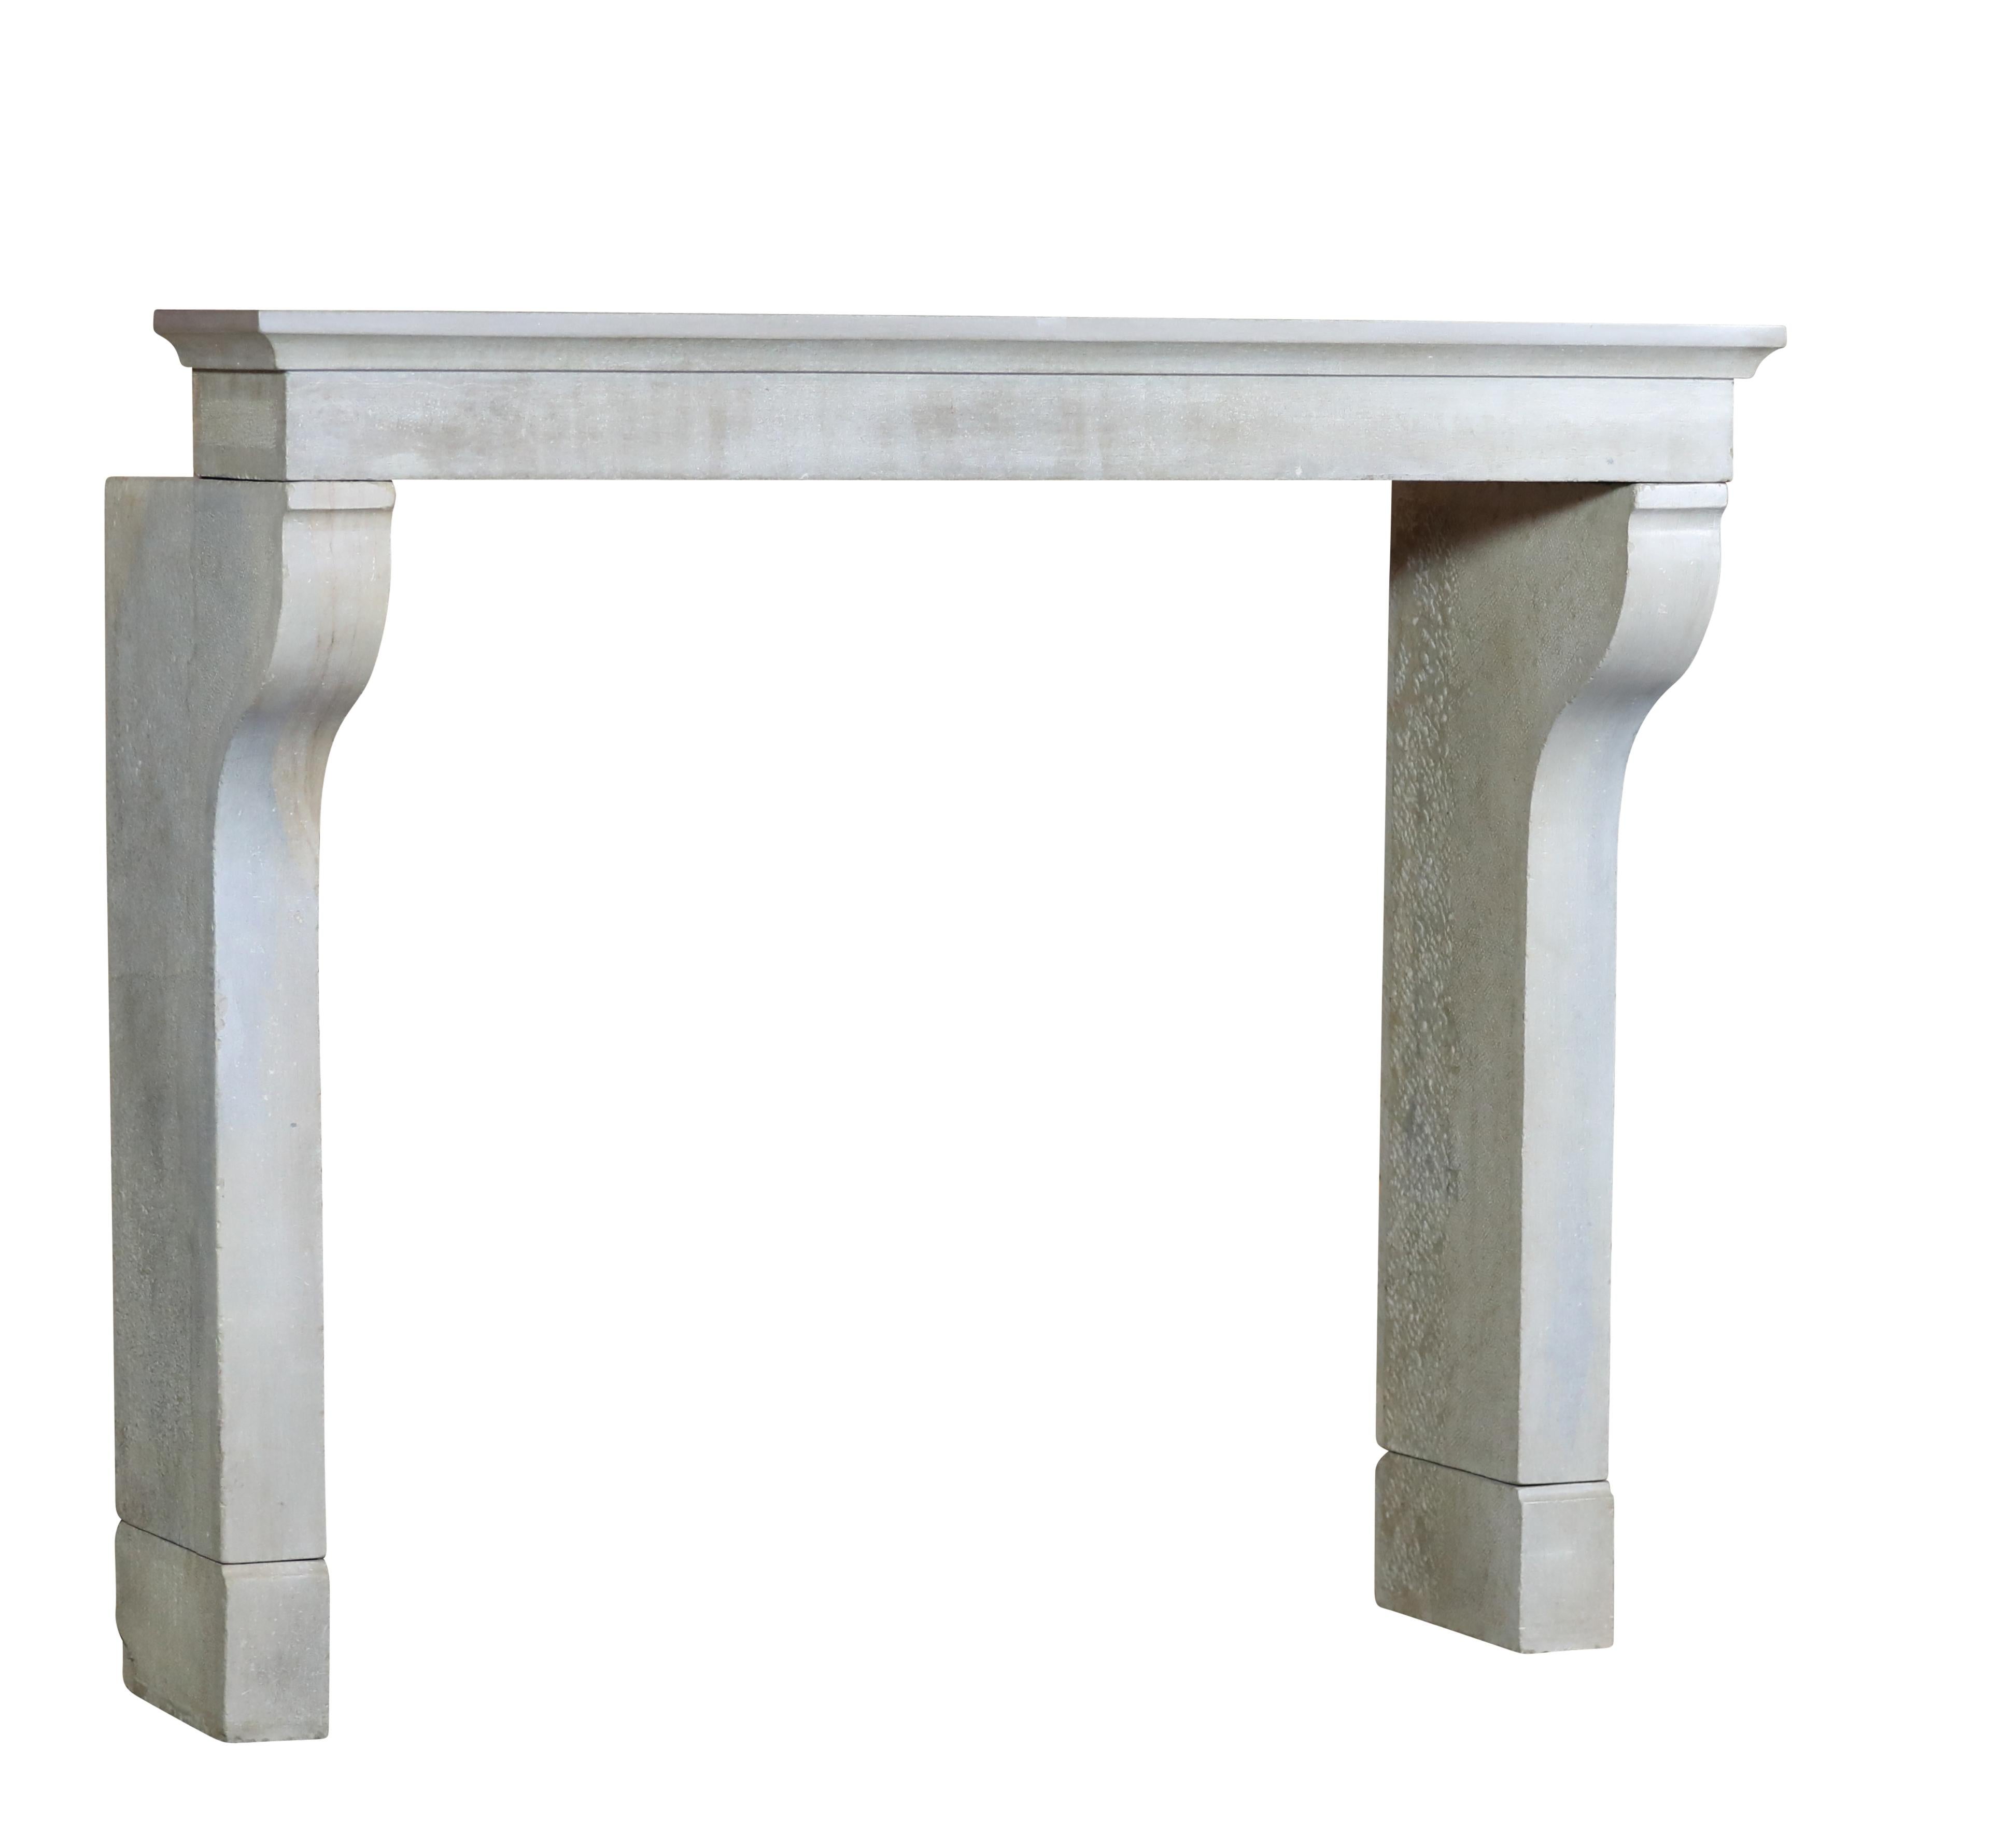 Elegant French country style fireplace surround in a light grey-ish hard limestone. This 17th century is a perfect fit for stylish timeless interior design. Fireplace interior renderings provided for extra imagination.
Measures:
163 cm Exterior